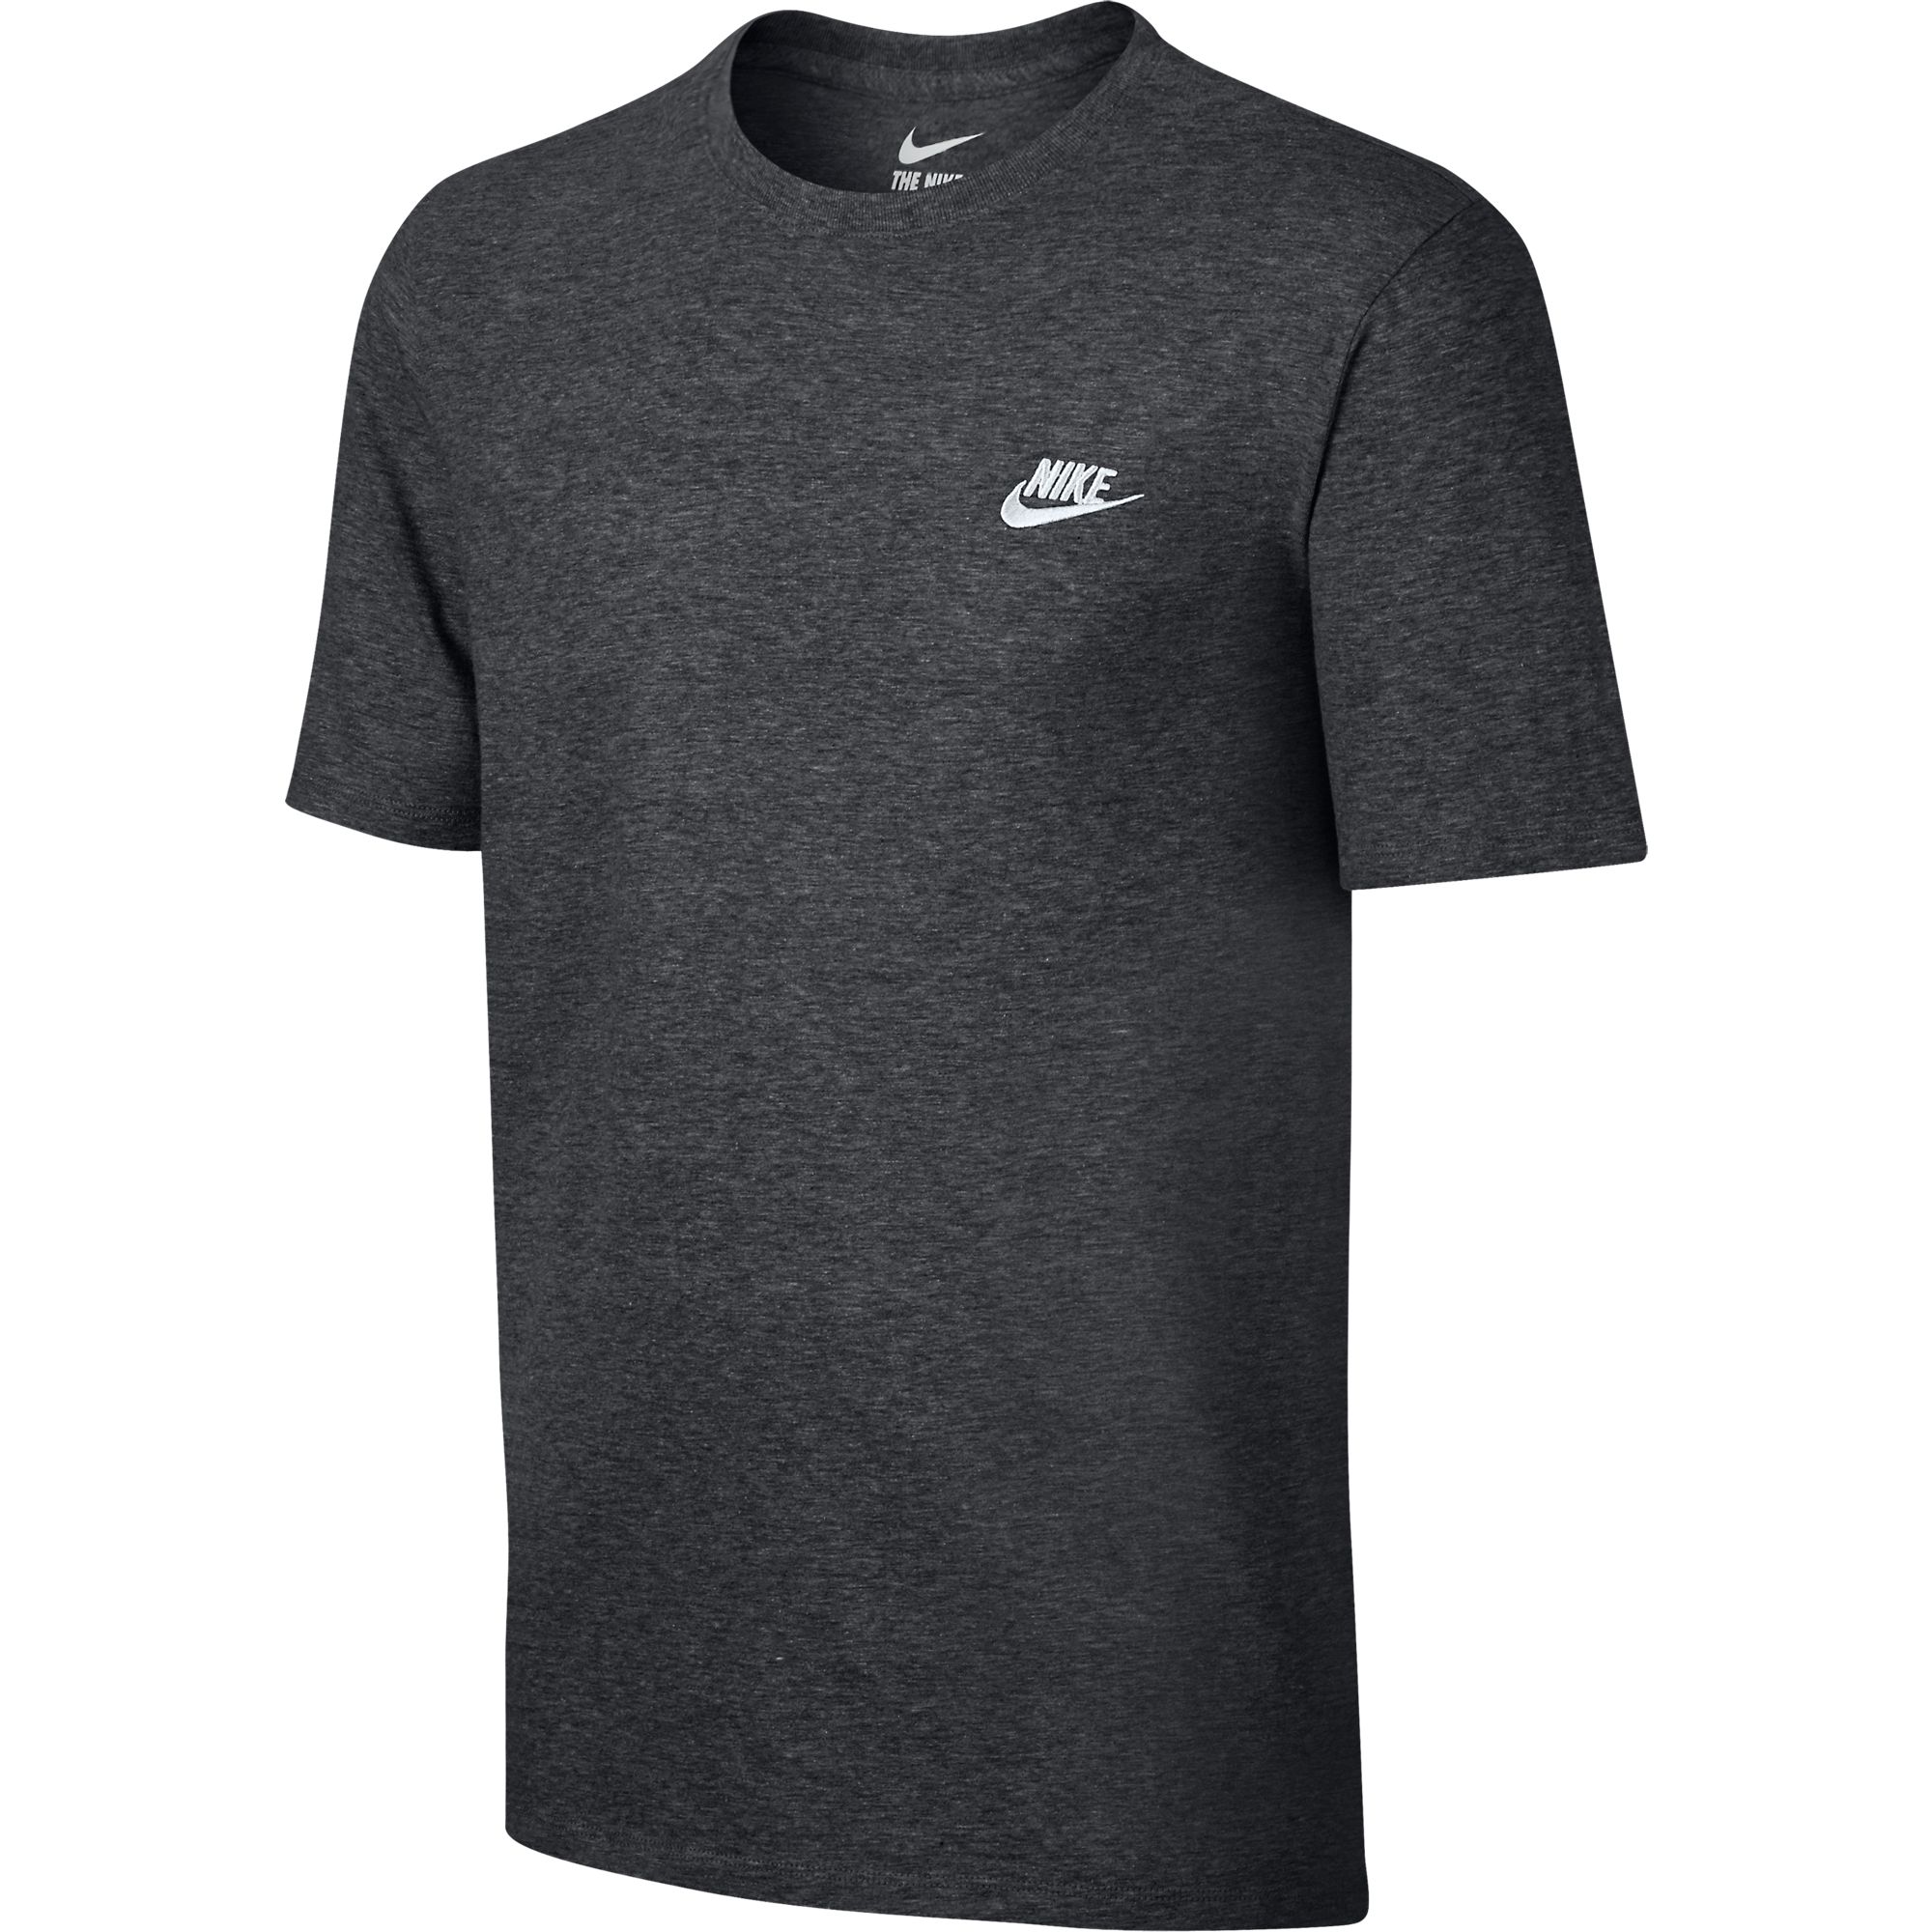 Nike Men's Embroidered Swoosh T-Shirt Charcoal Heather/White 827021-071